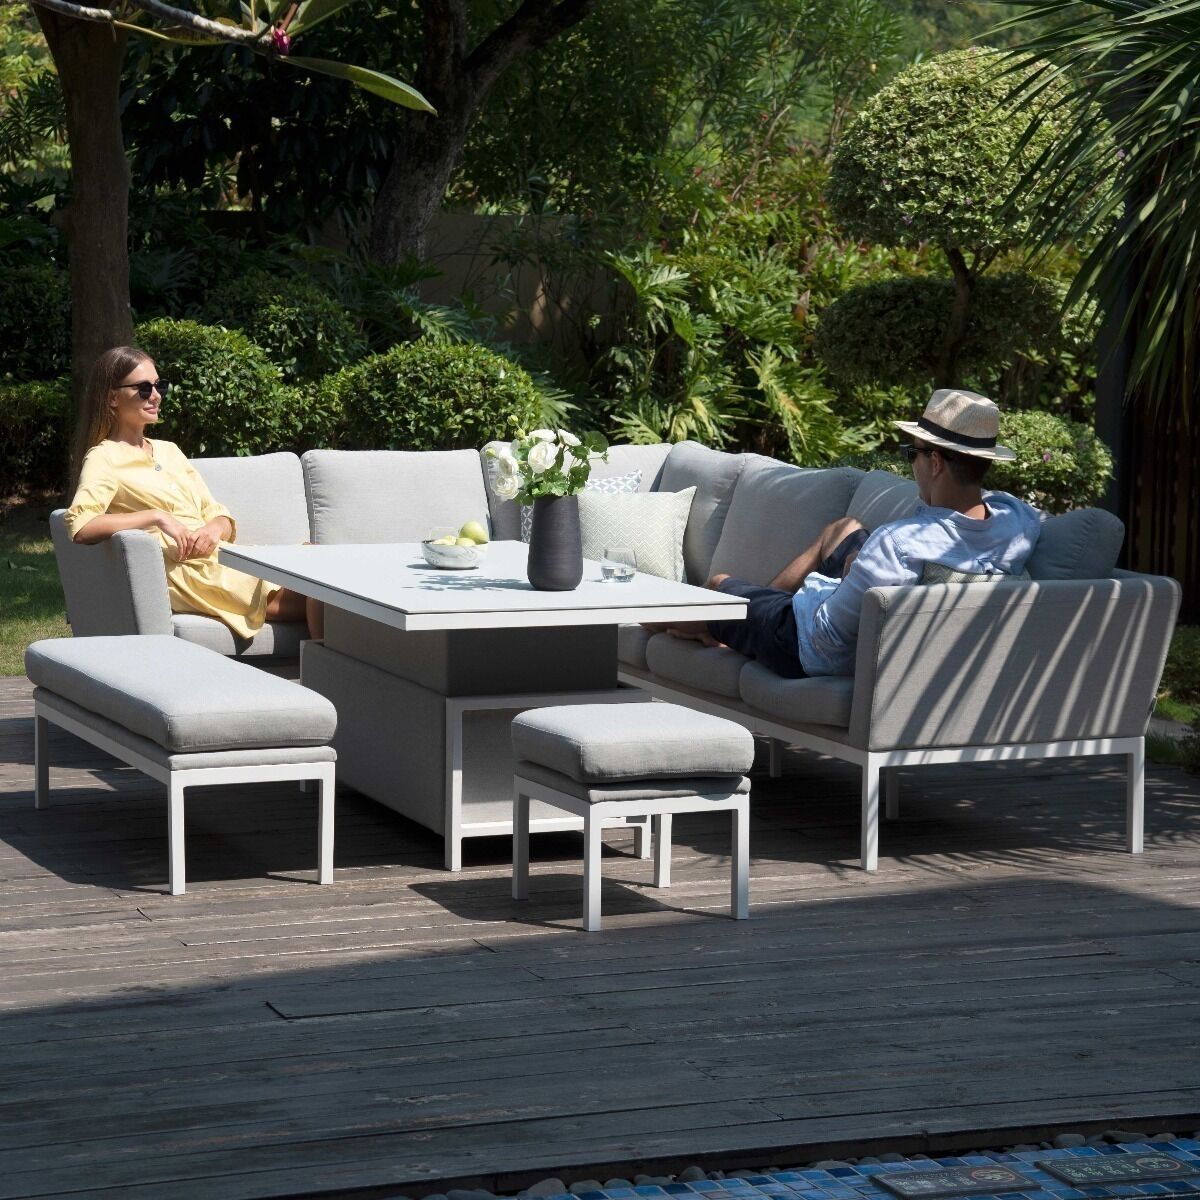 Maze - Outdoor Fabric Pulse Rectangular Corner Dining Set with Rising Table - Lead Chine product image